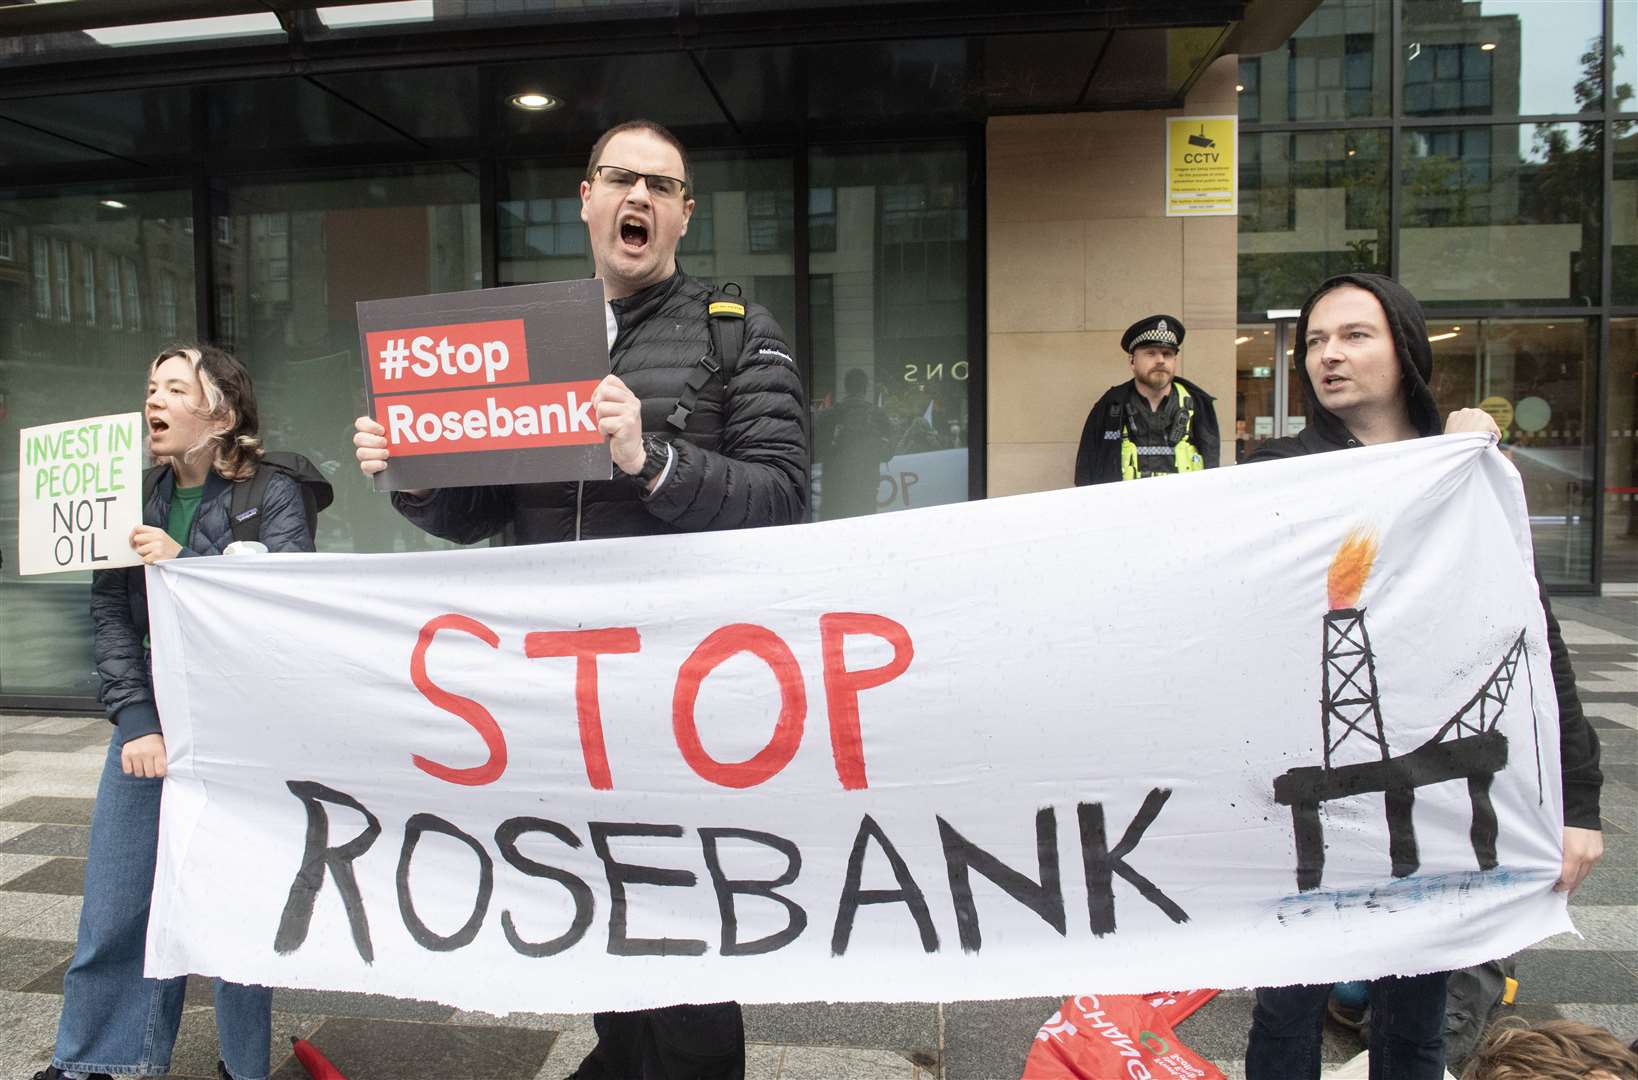 Protesters shouted slogans including Revoke Rosebank at the Labour Party conference (Lesley Martin/PA)